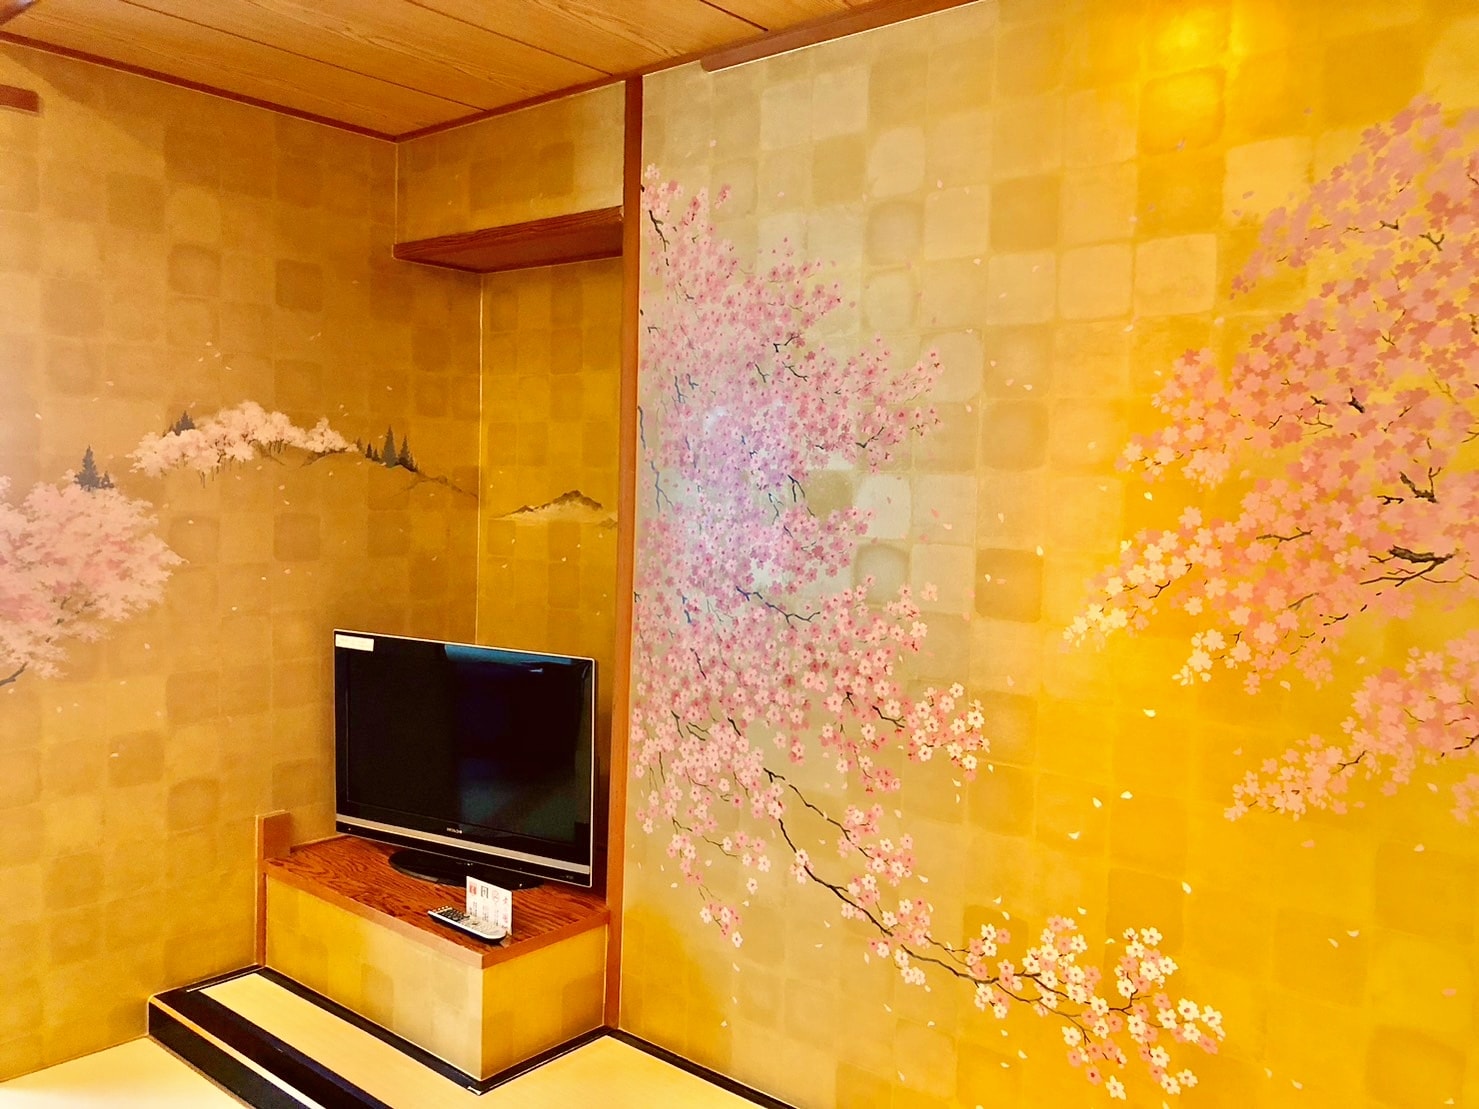 Special room for paintings (example) “Sakura Taihei” room (cherry blossoms in full bloom)